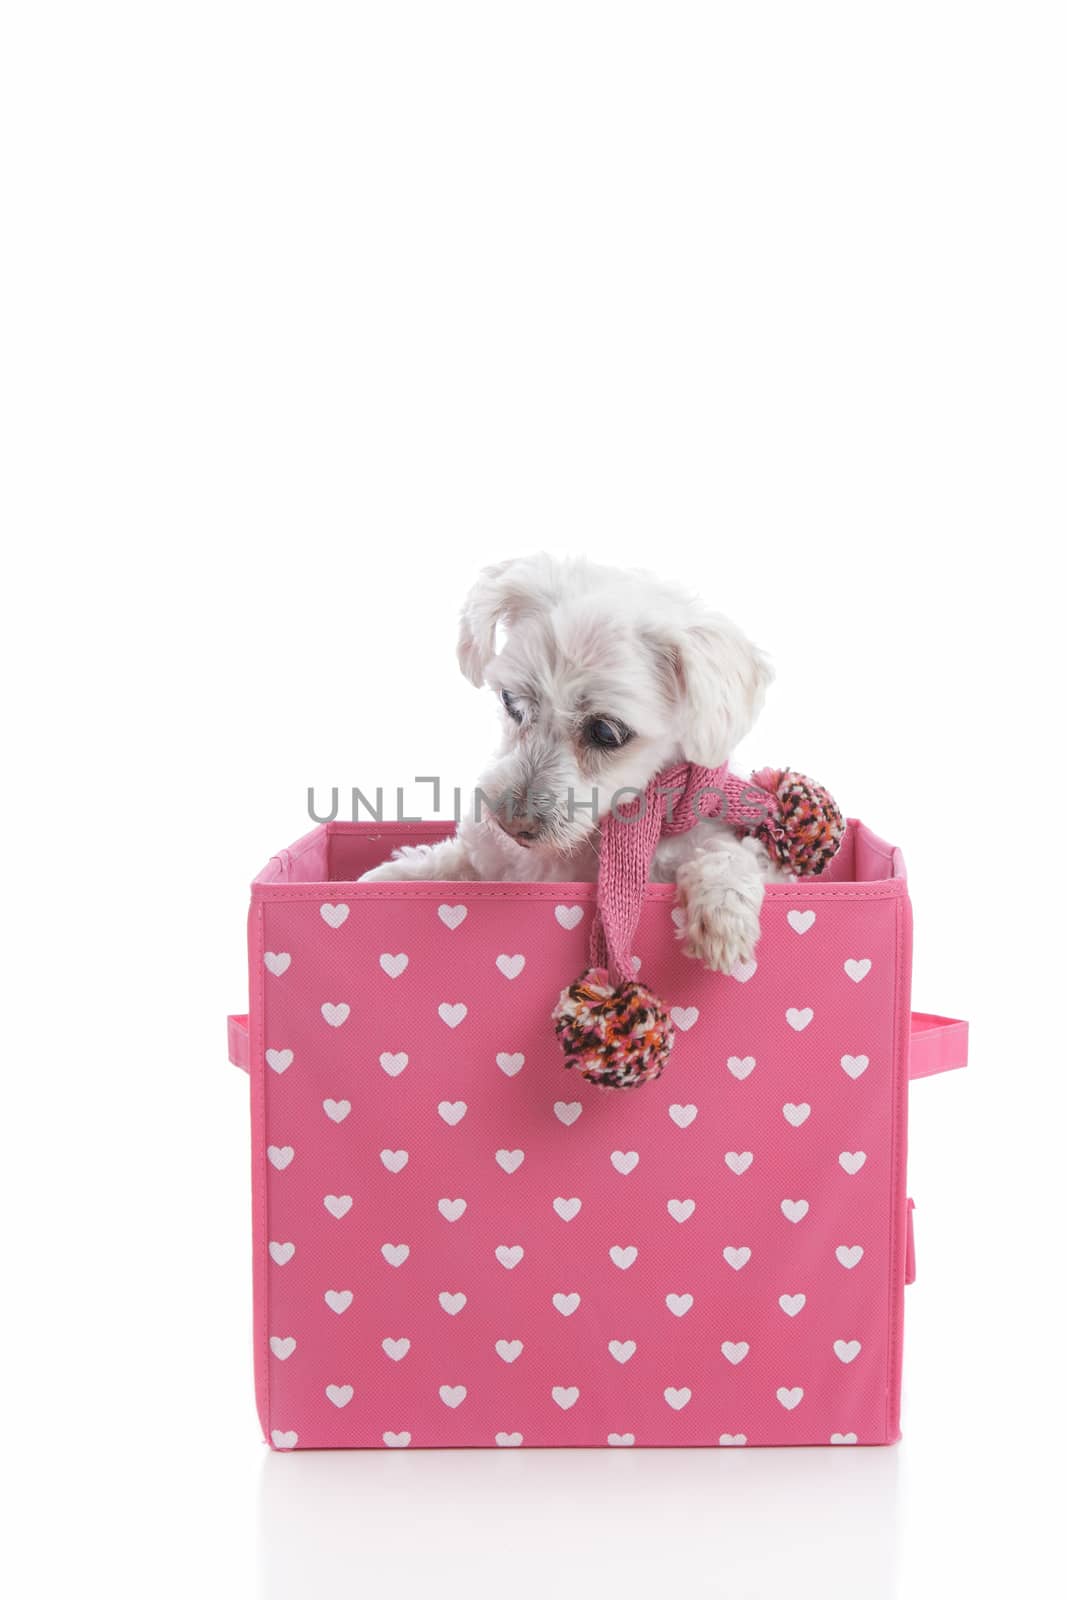 Small white puppy dog wearing a winter scarf and in a pink and white love heart box.